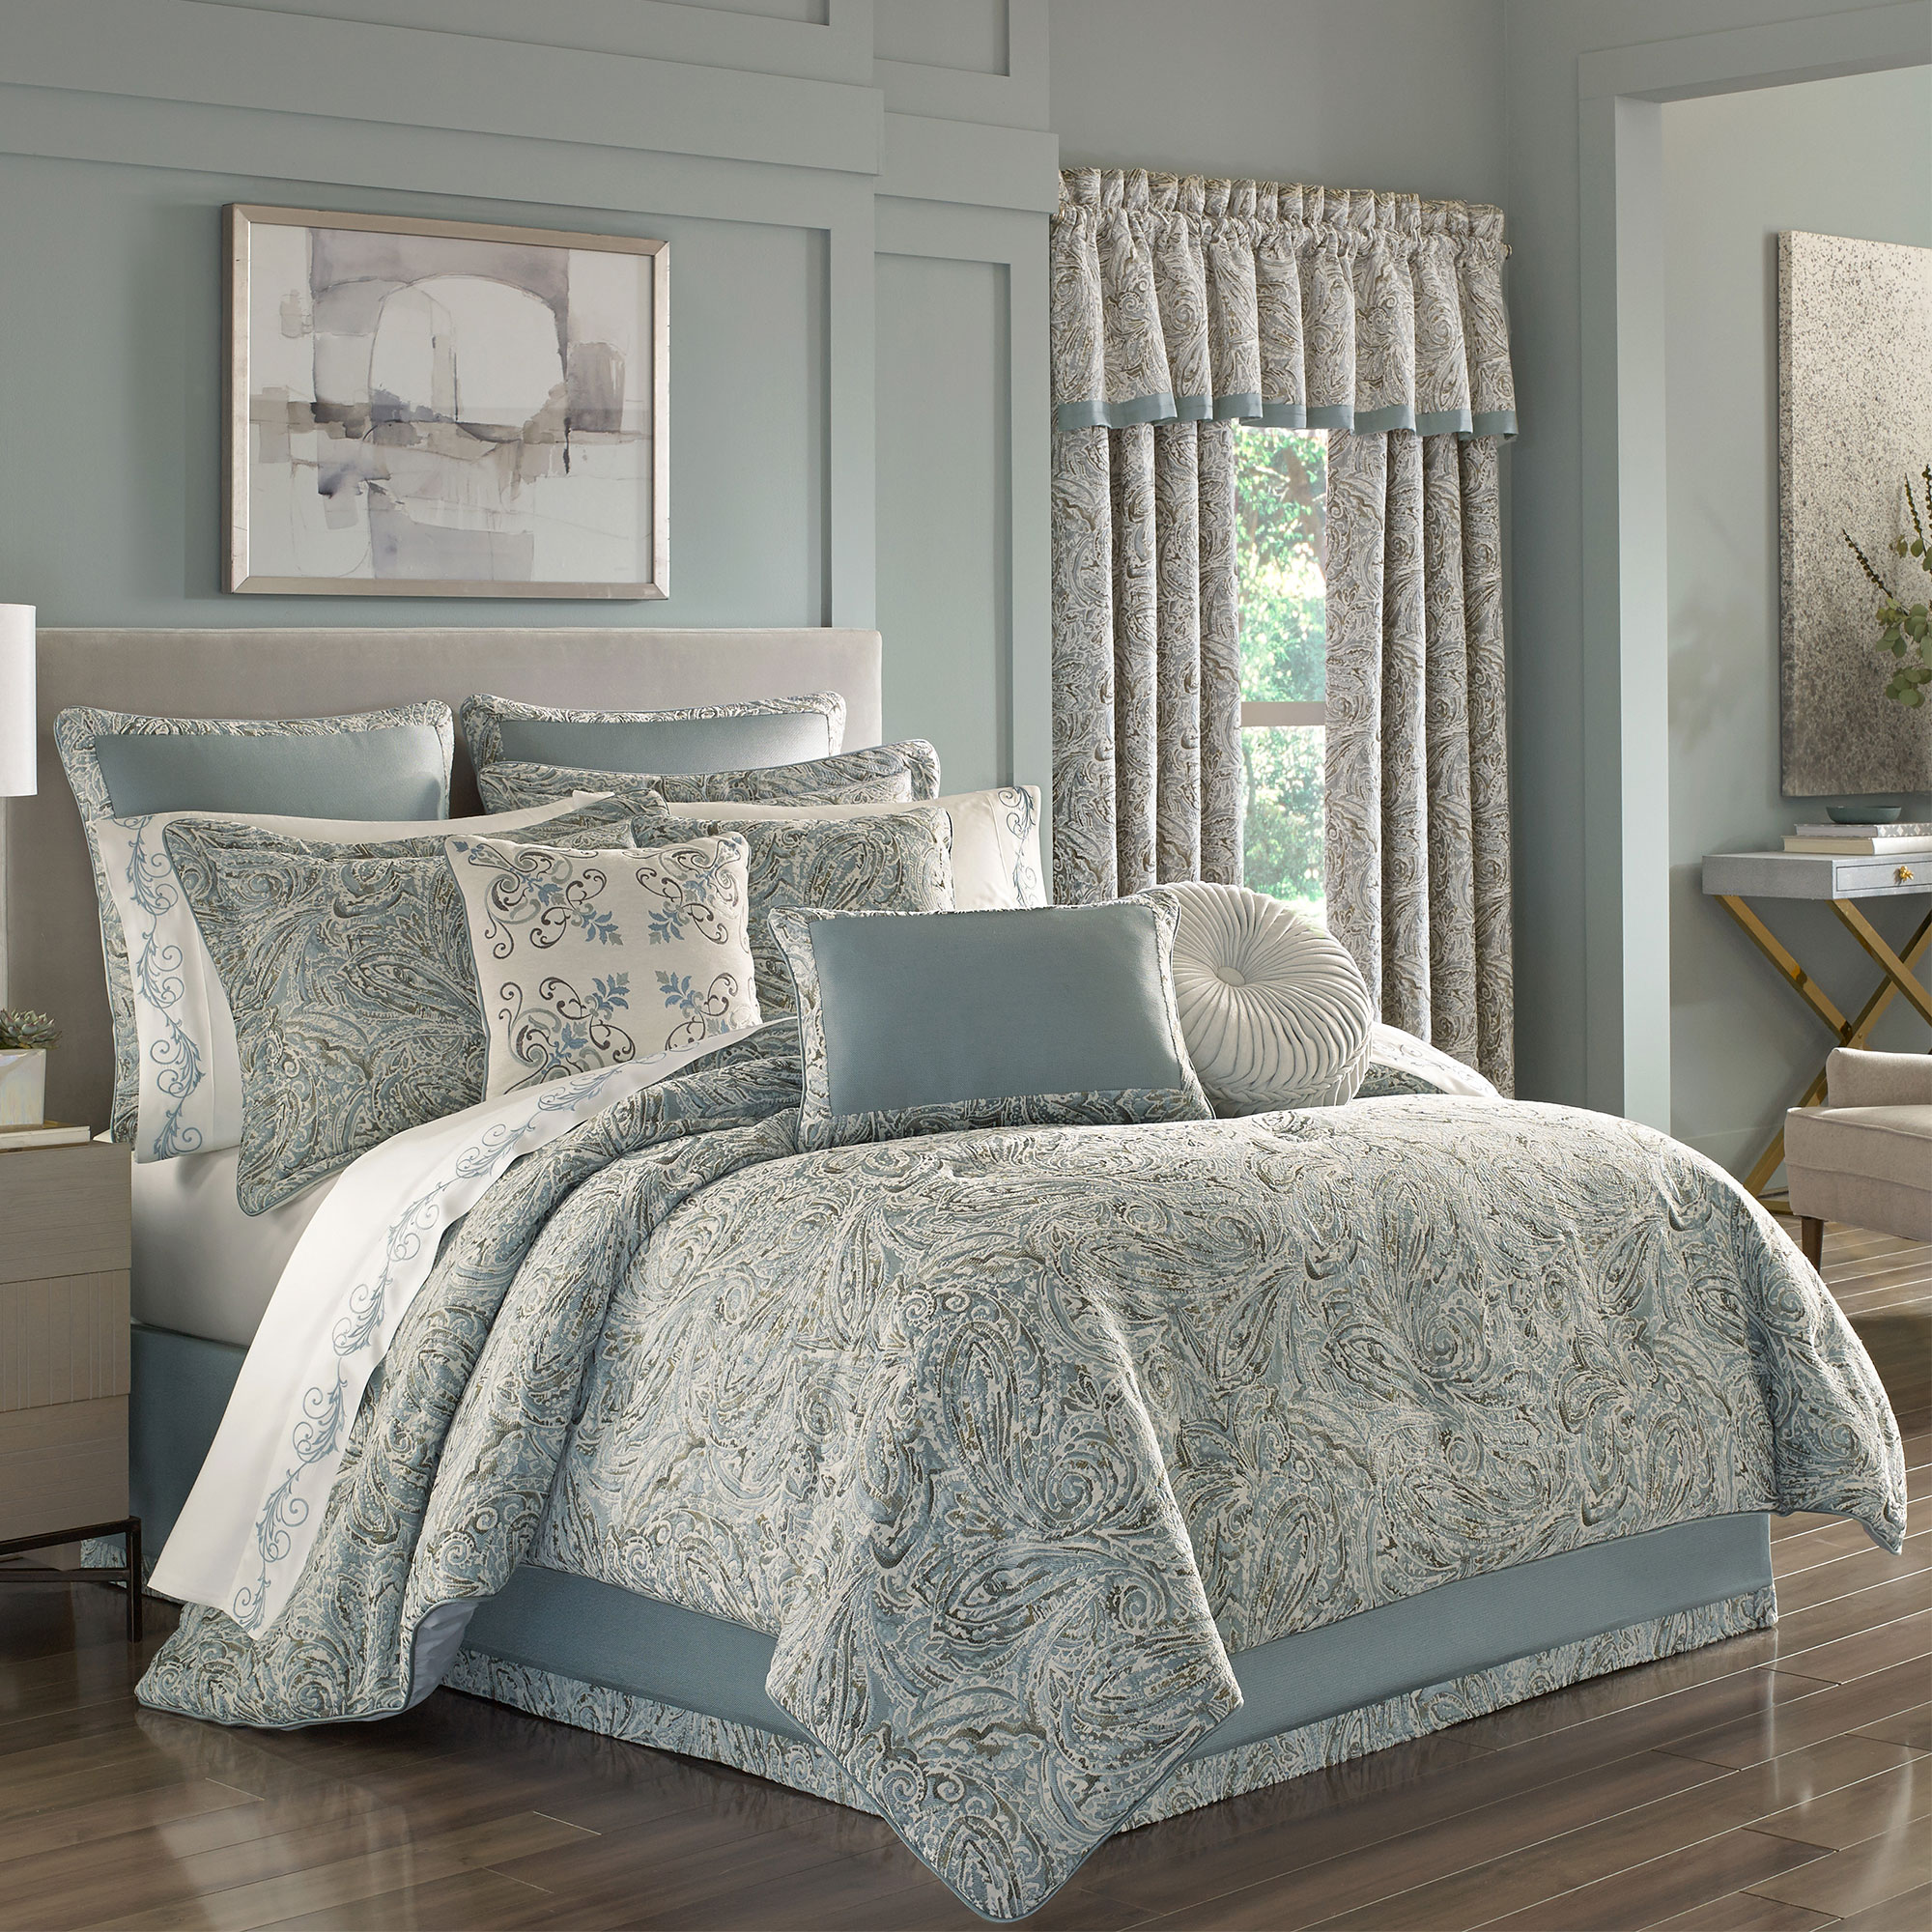 Queen  King Size Luxury Comforter Sets 2021 Latest